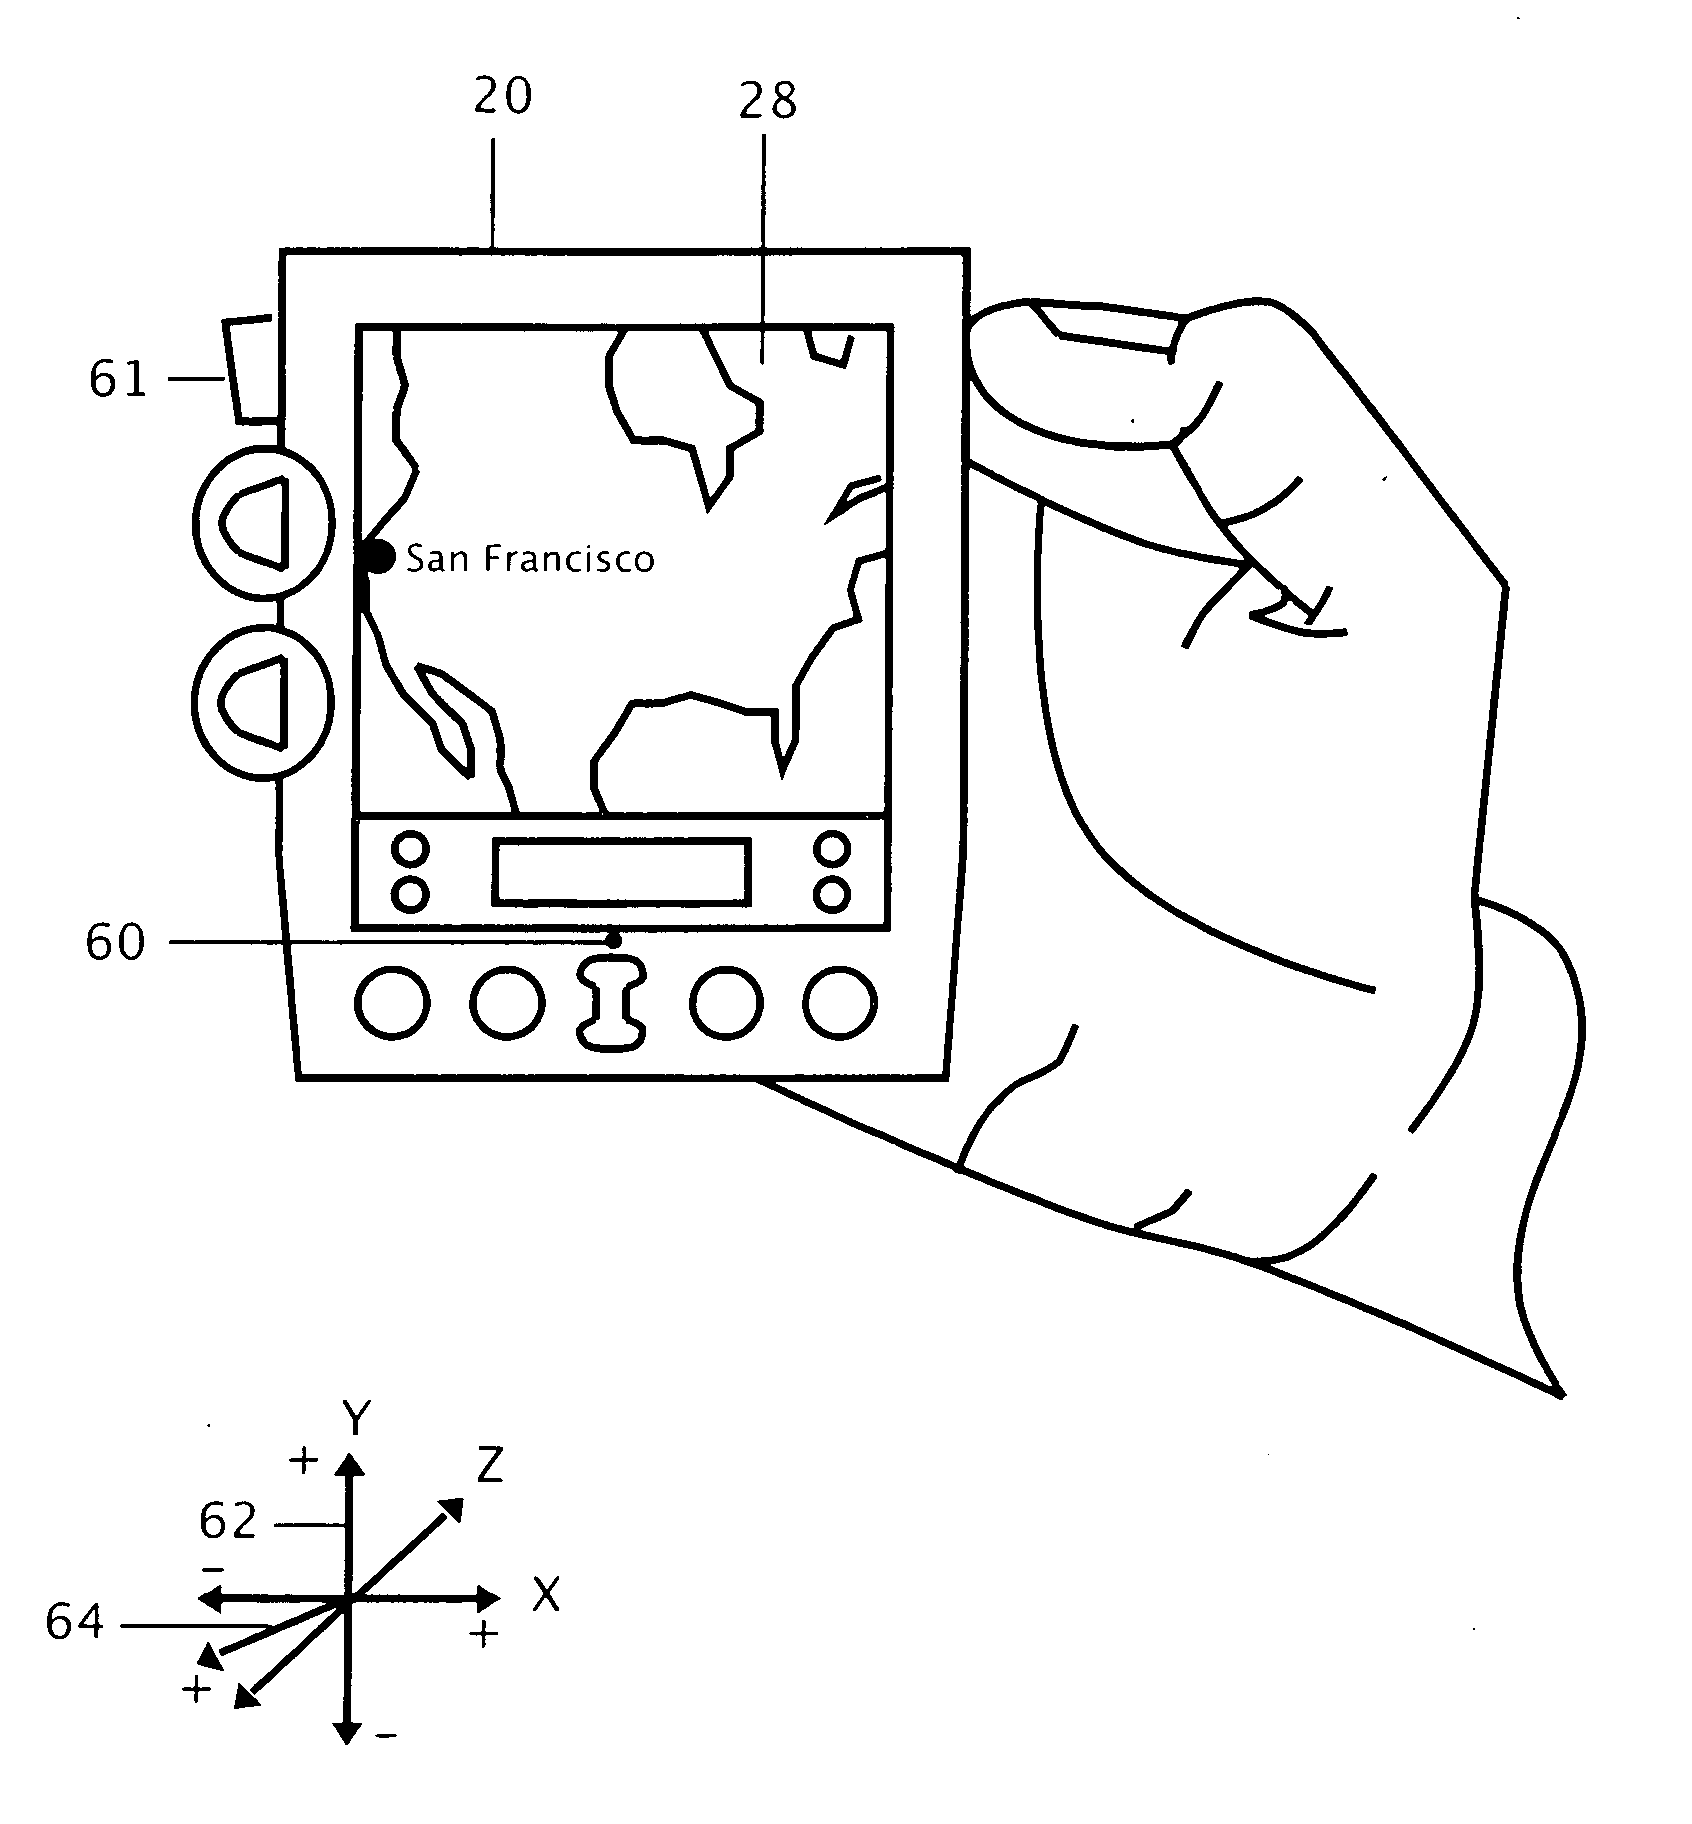 Motion detection and tracking system to control navigation and display of portable displays including on-chip gesture detection